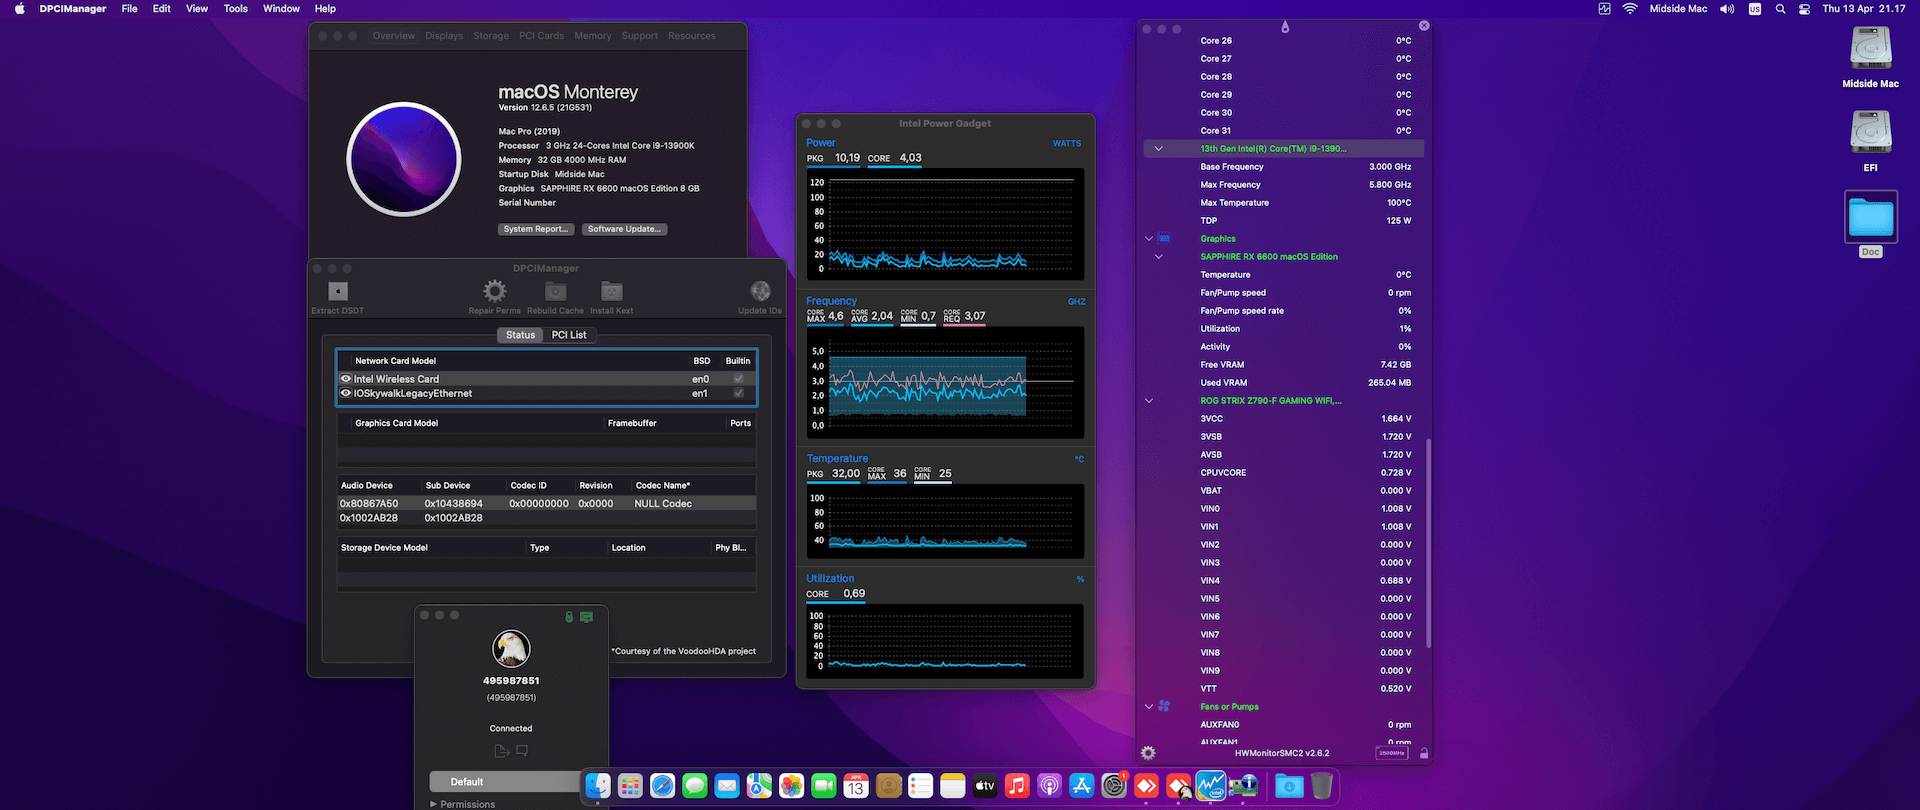 Success Hackintosh macOS Monterey 12.6.5 Build 21G531 in Asus ROG Strix Z790-F Gaming Wifi + Intel Core i9 13900K + Sapphire RX 6600